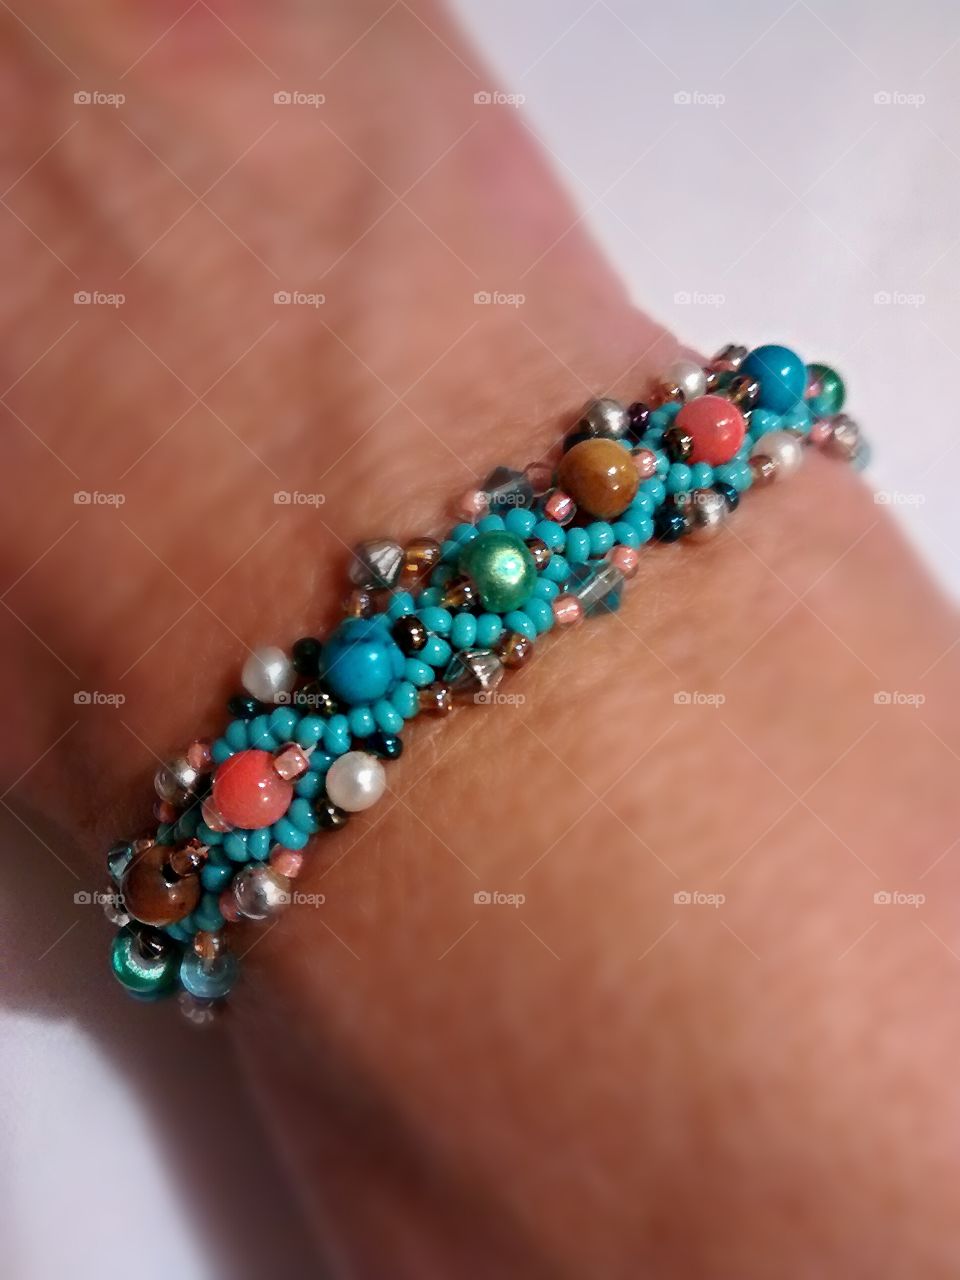 Inspired by marine colors, this single strand seed bead bracelet is embellished with multiple tiny precious stone, metal, and faux pearls.